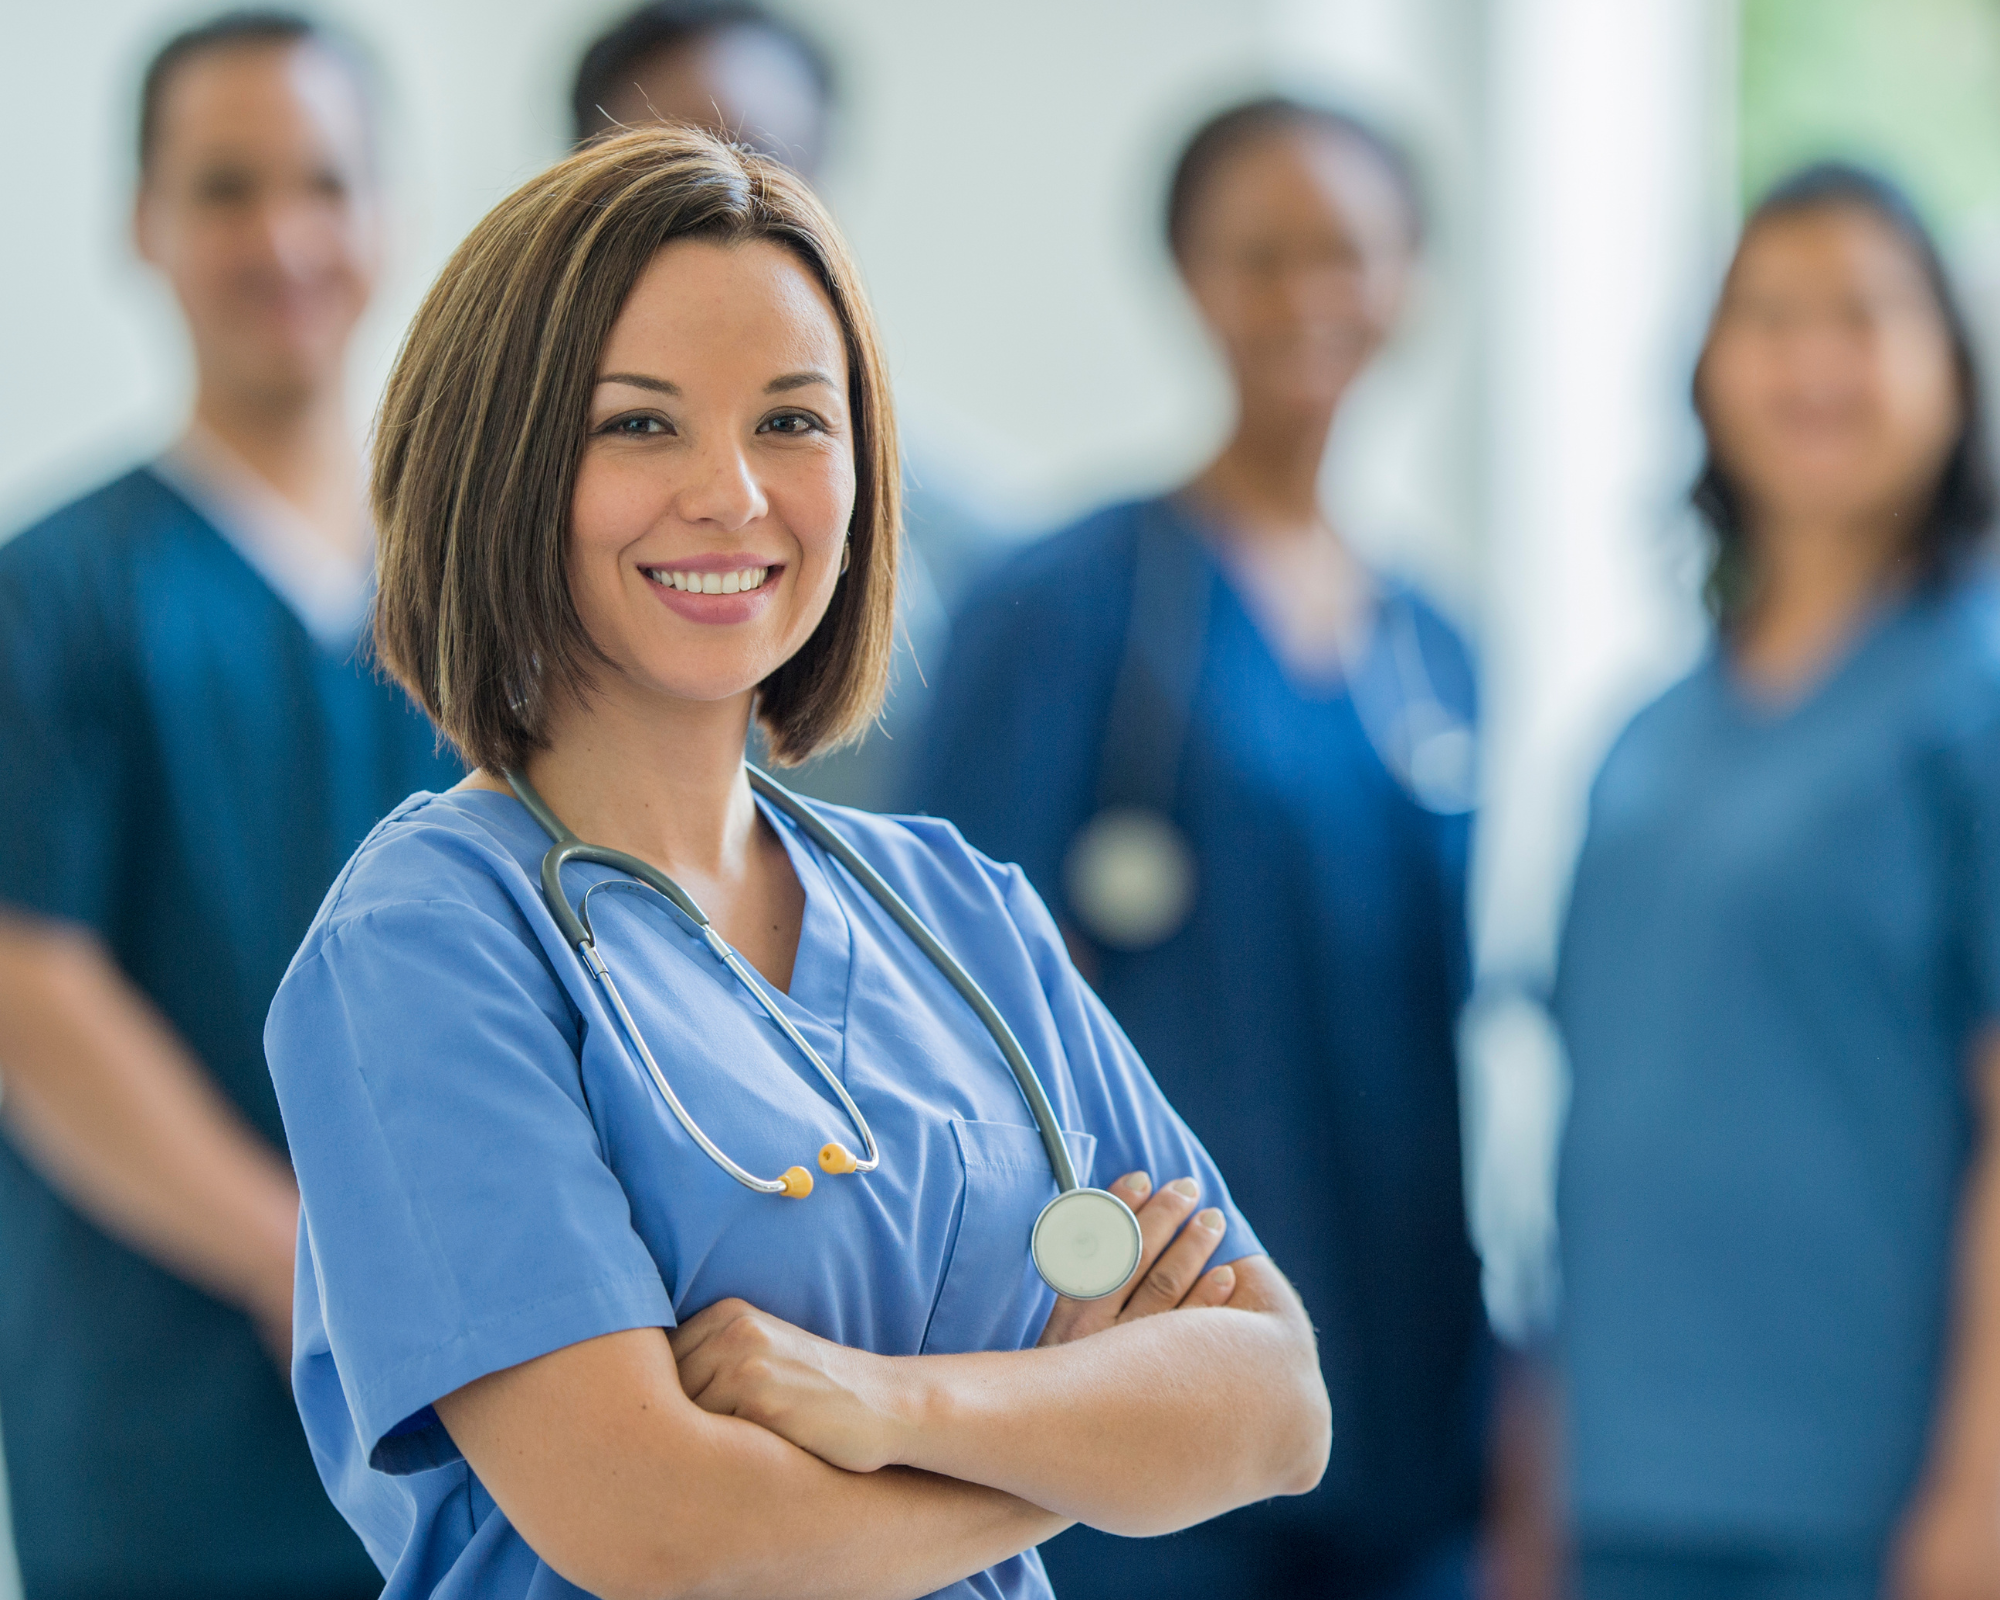 Woman in scrubs standing in front of other medical professionals: side hustle for nurses